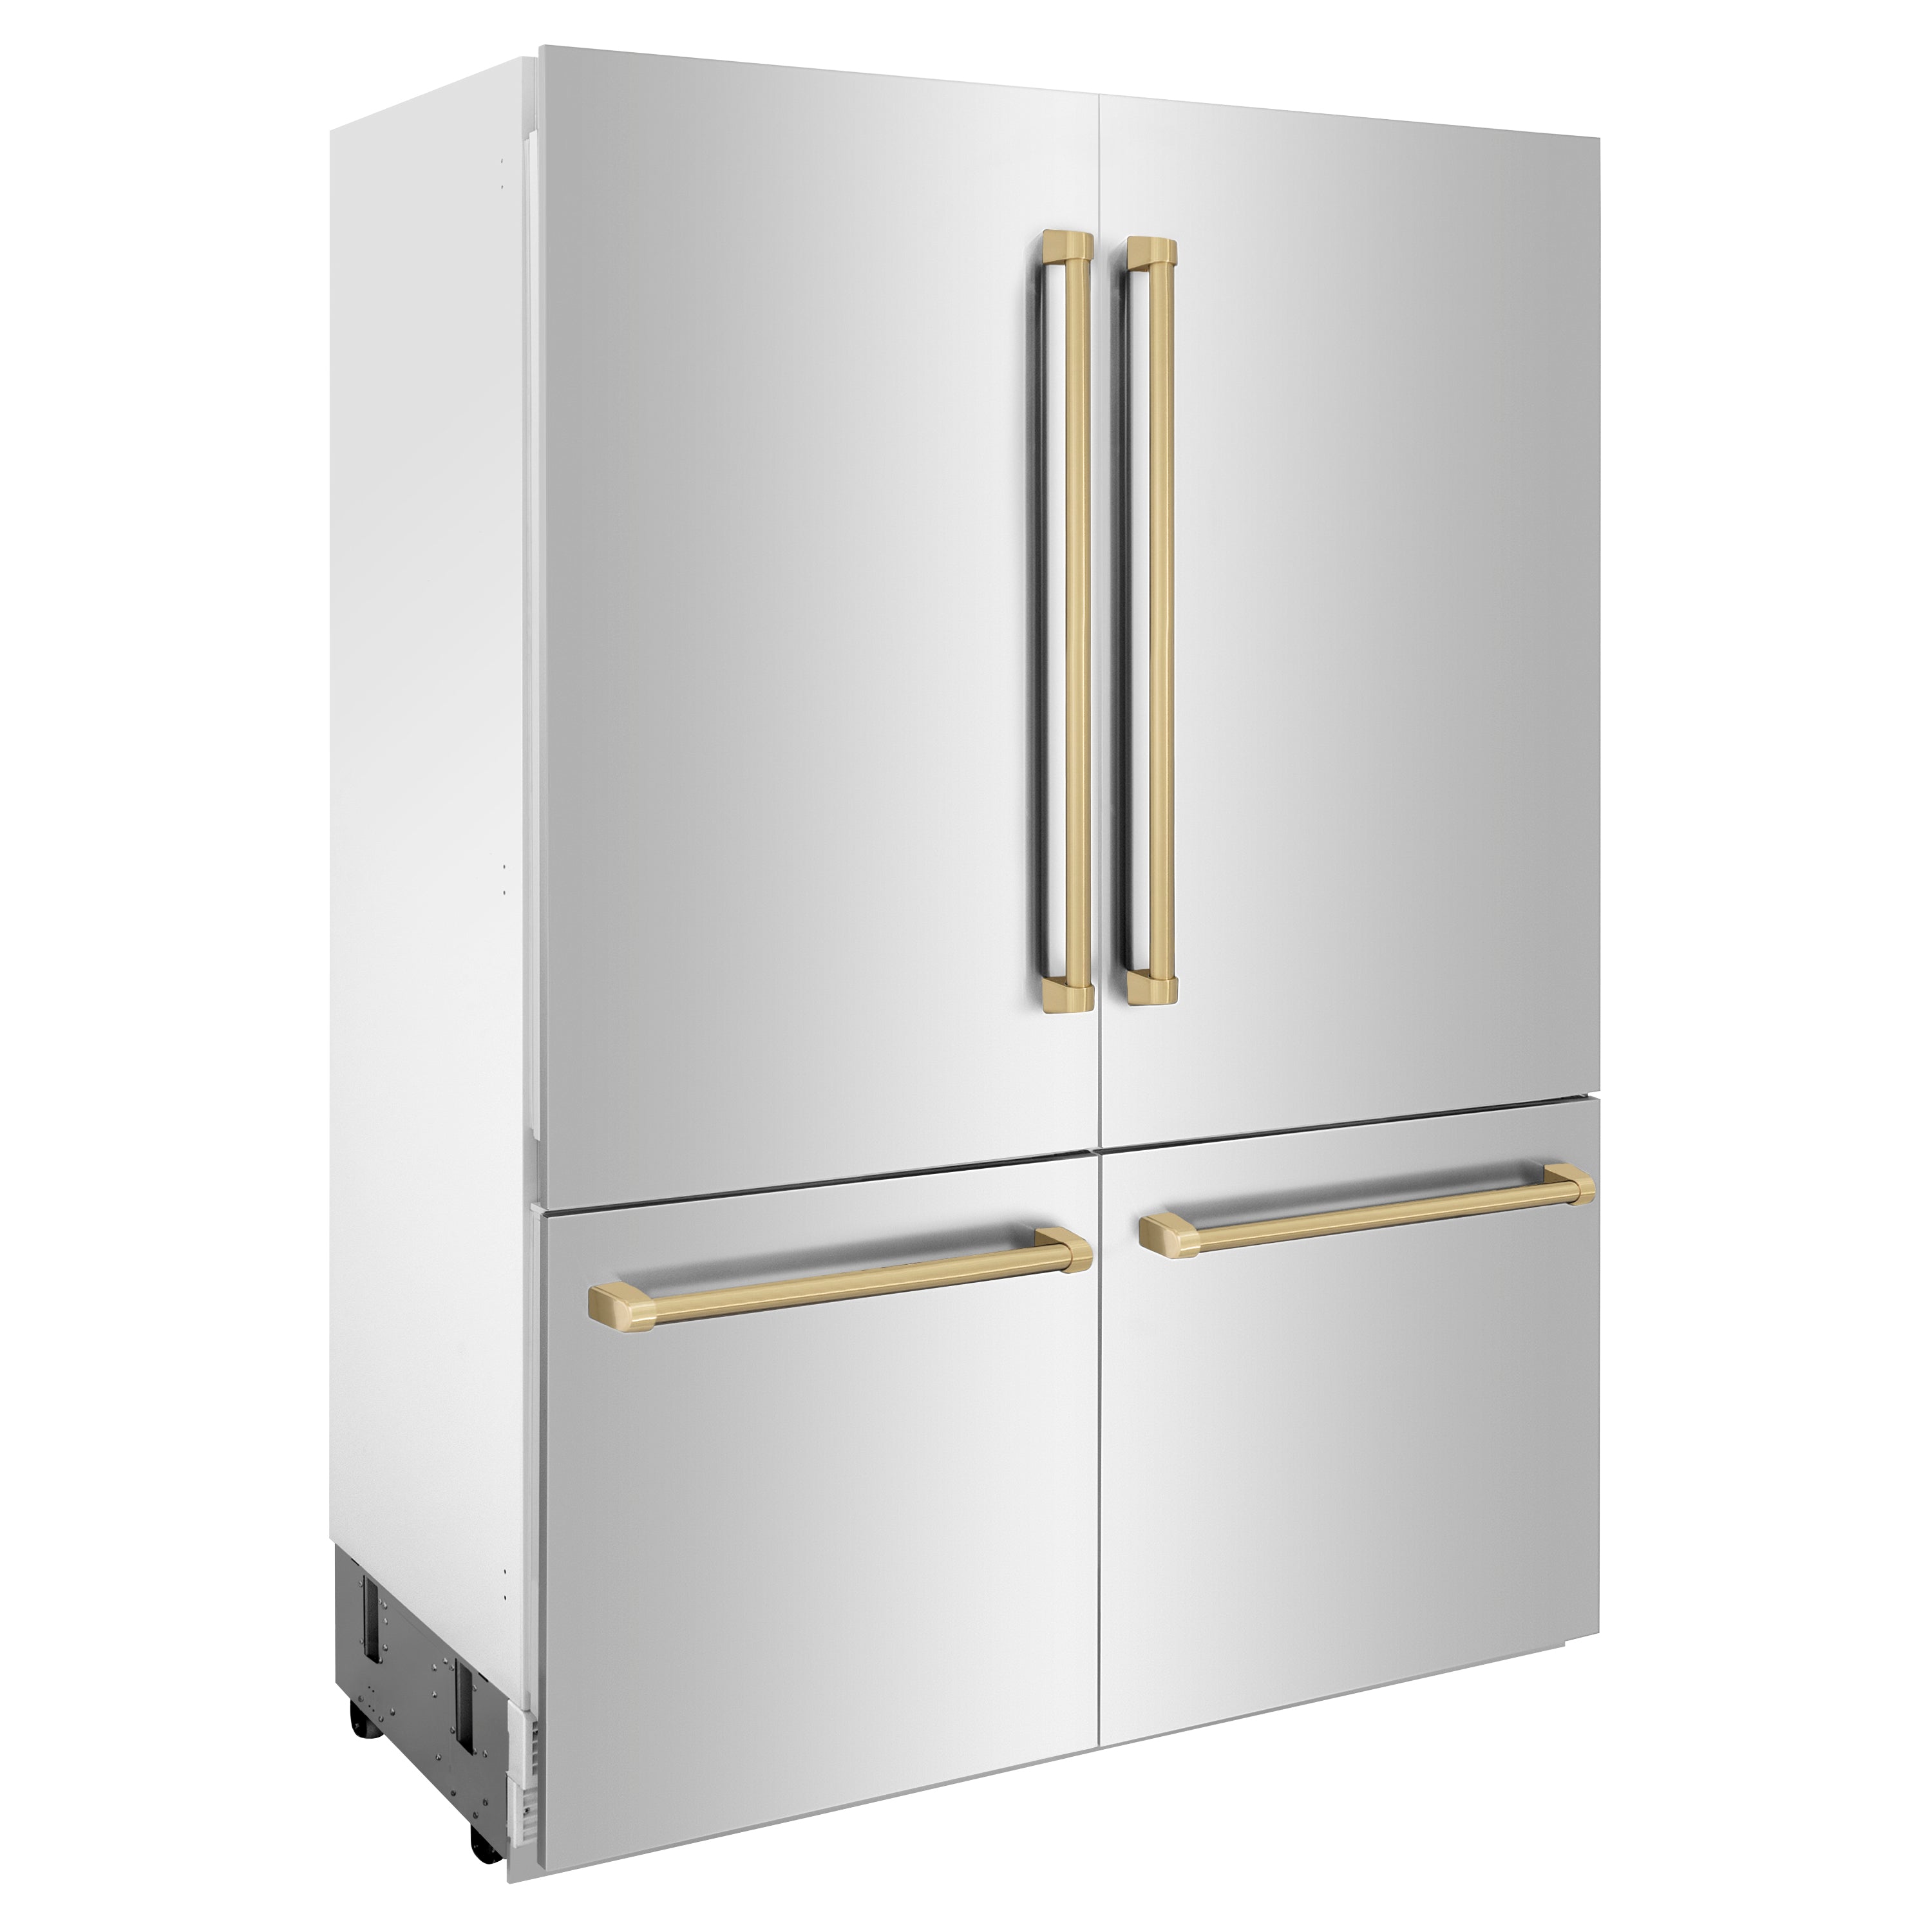 ZLINE 60" Autograph Edition 32.2 cu. ft. Built-in 4-Door French Door Refrigerator with Internal Water and Ice Dispenser in Stainless Steel with Champagne Bronze Accents